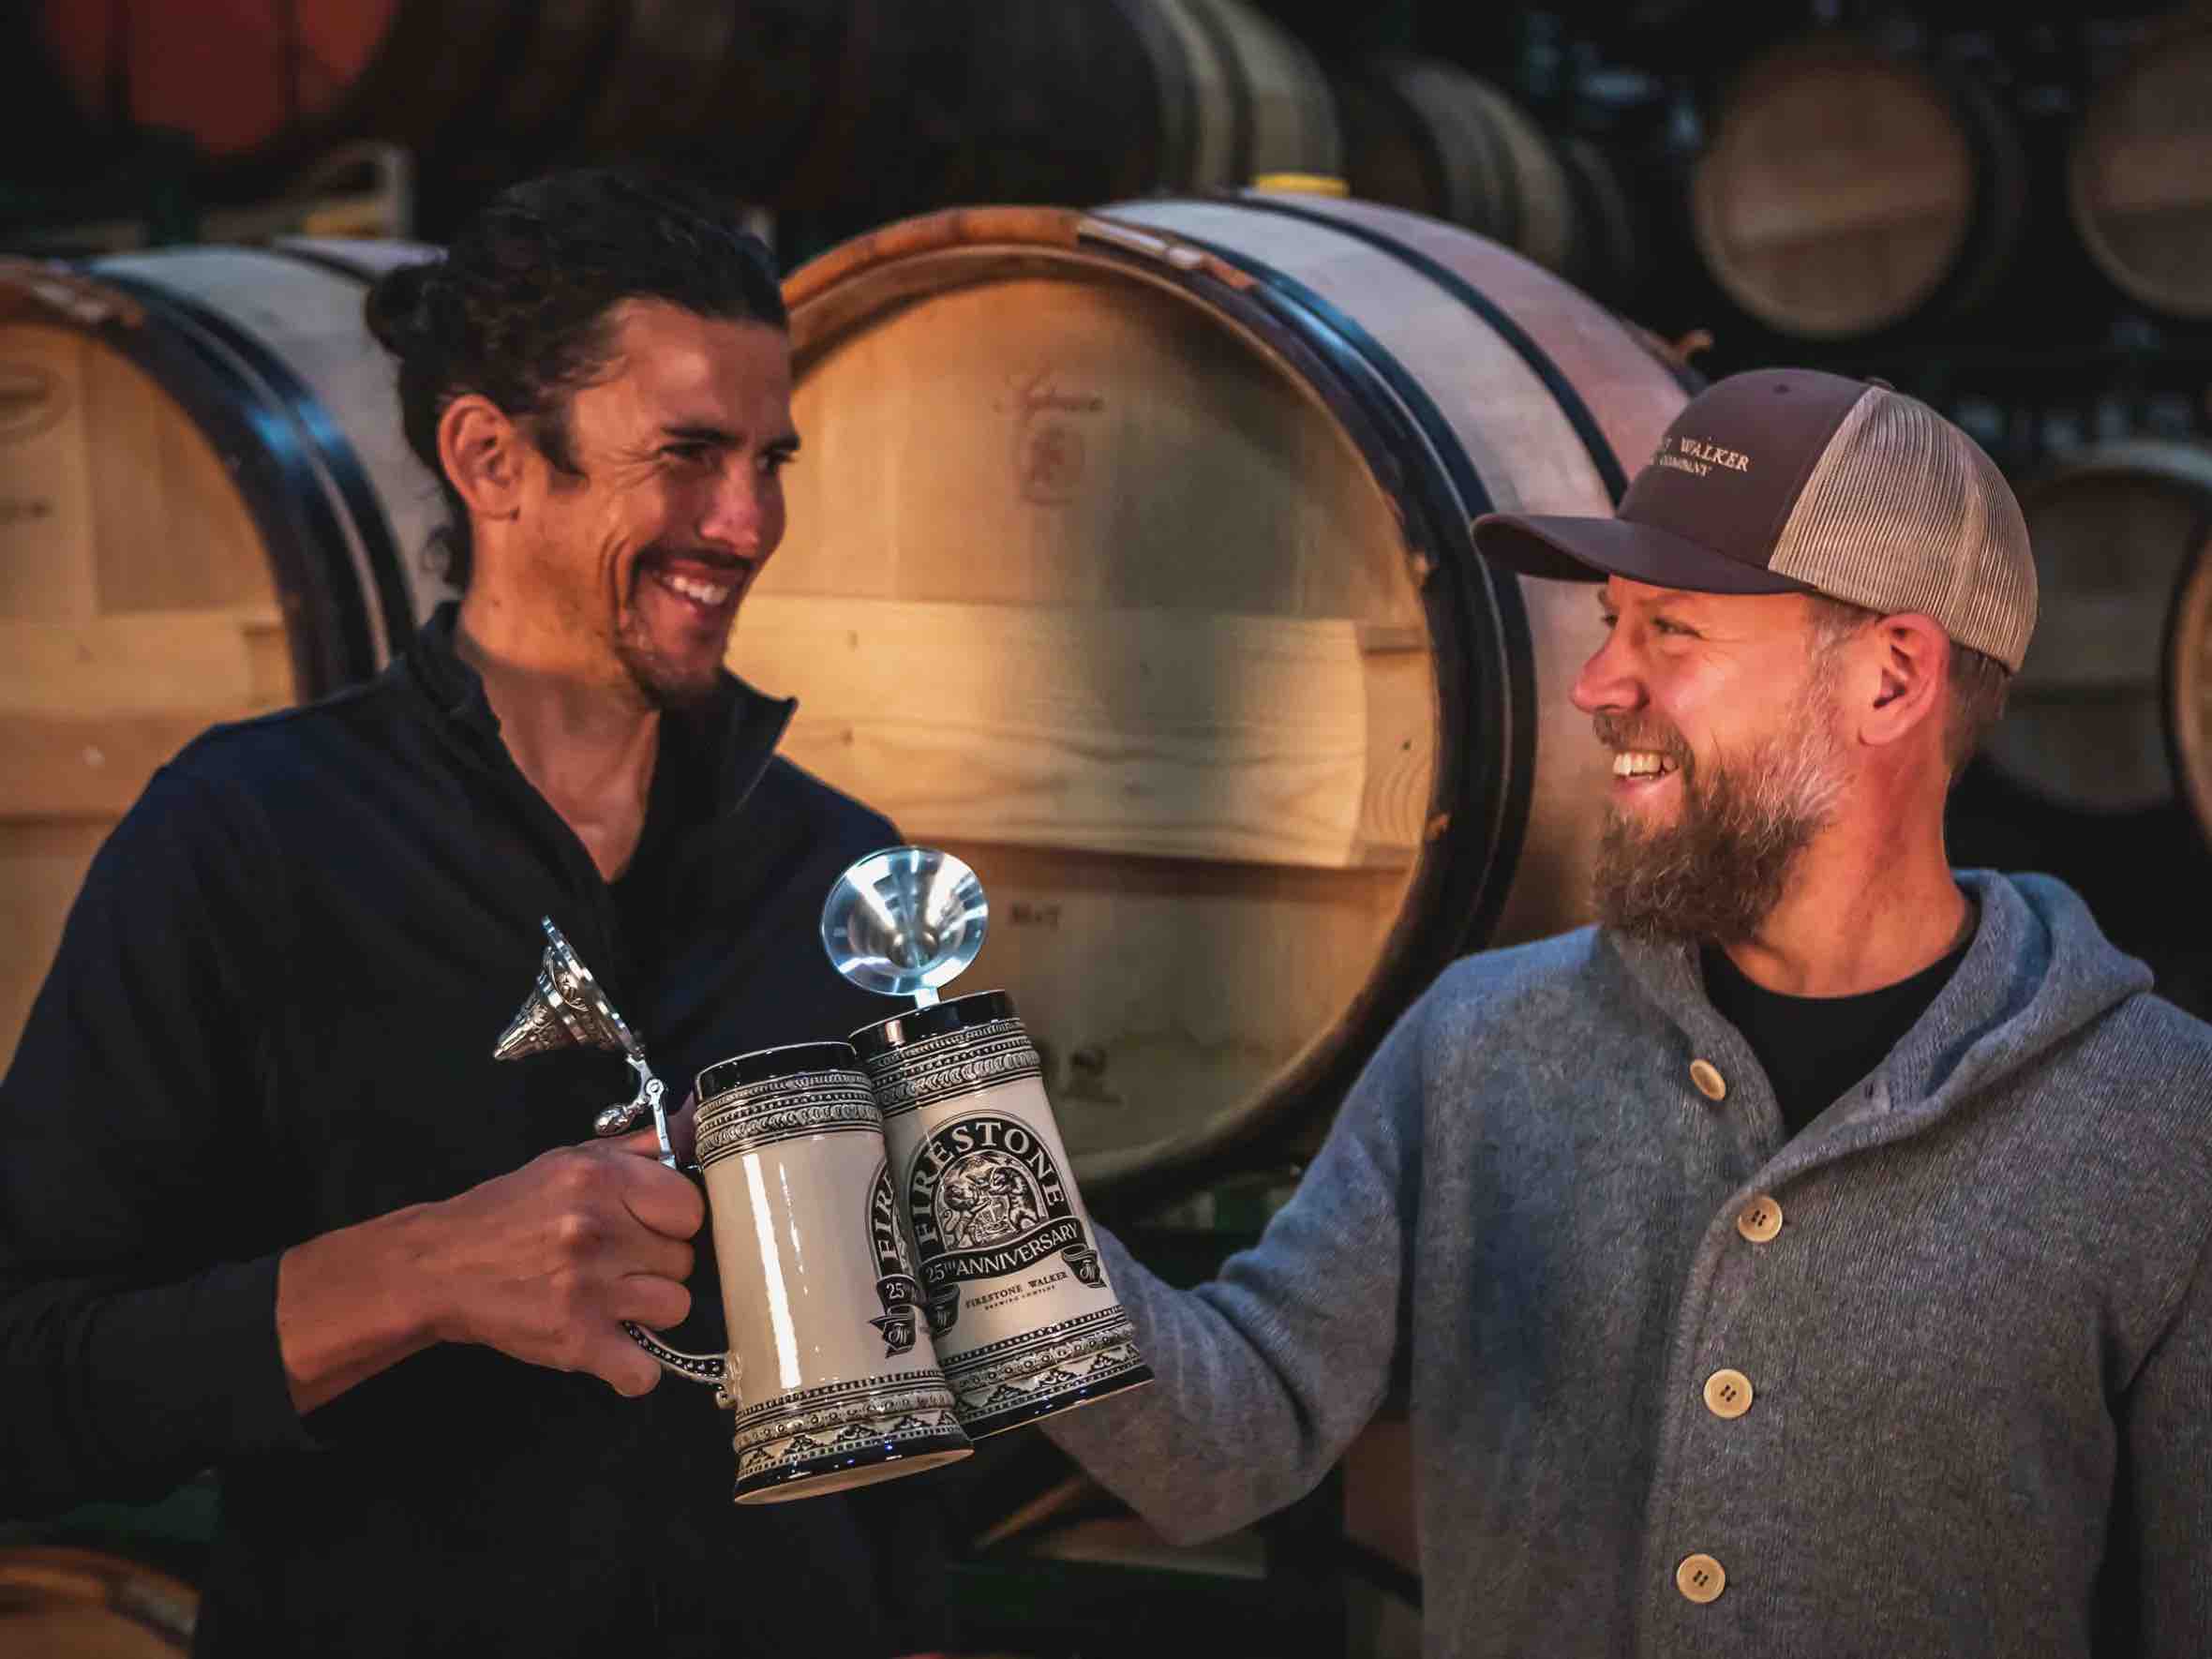 image of Eric Ponce and Matt Brynildson with Oaktoberfest Steins courtesy of Firestone Walker Brewing